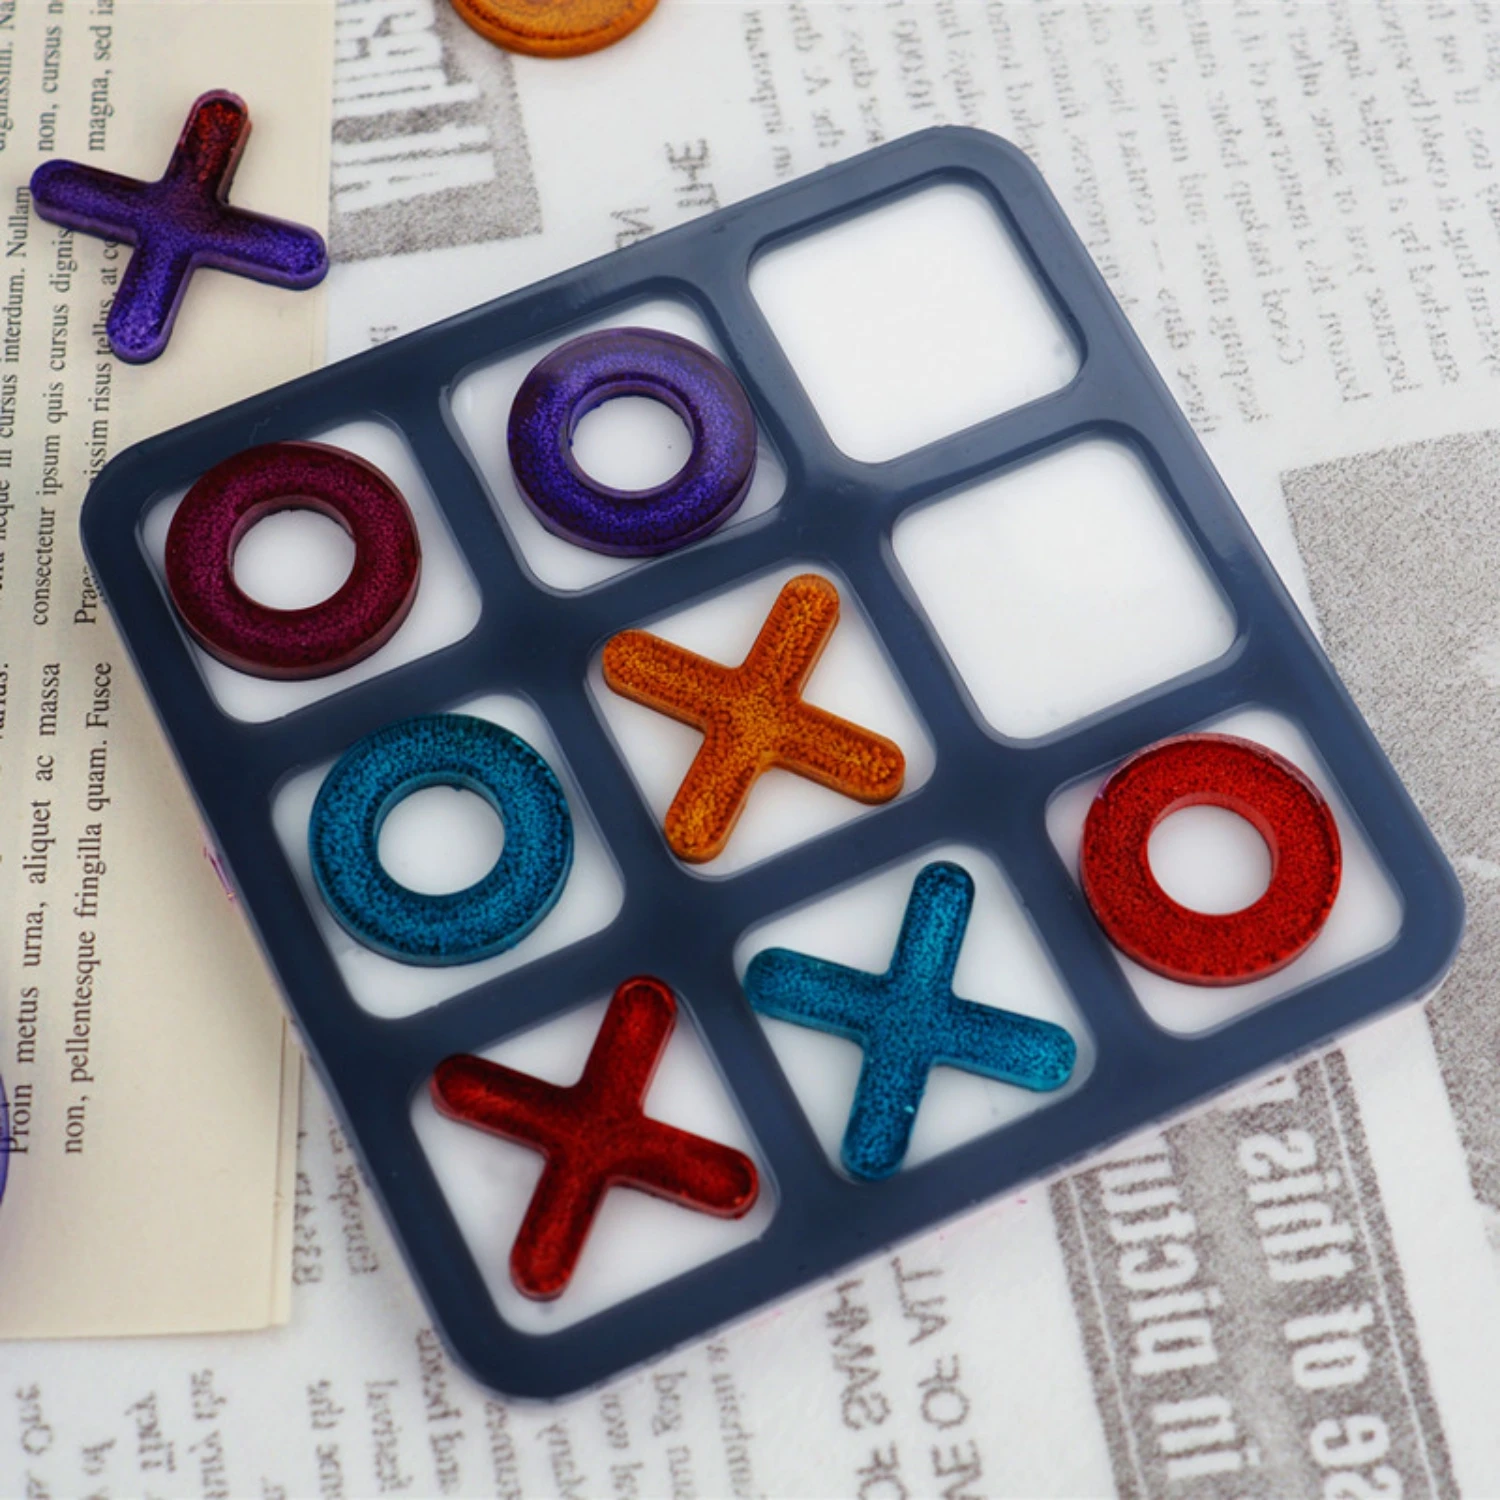 Tic Tac Toe OX Chess Game Mirror Silicone Casting Mold For DIY Resin Uv Epoxy Jewelry Tools Craft Handmade Making Small Size